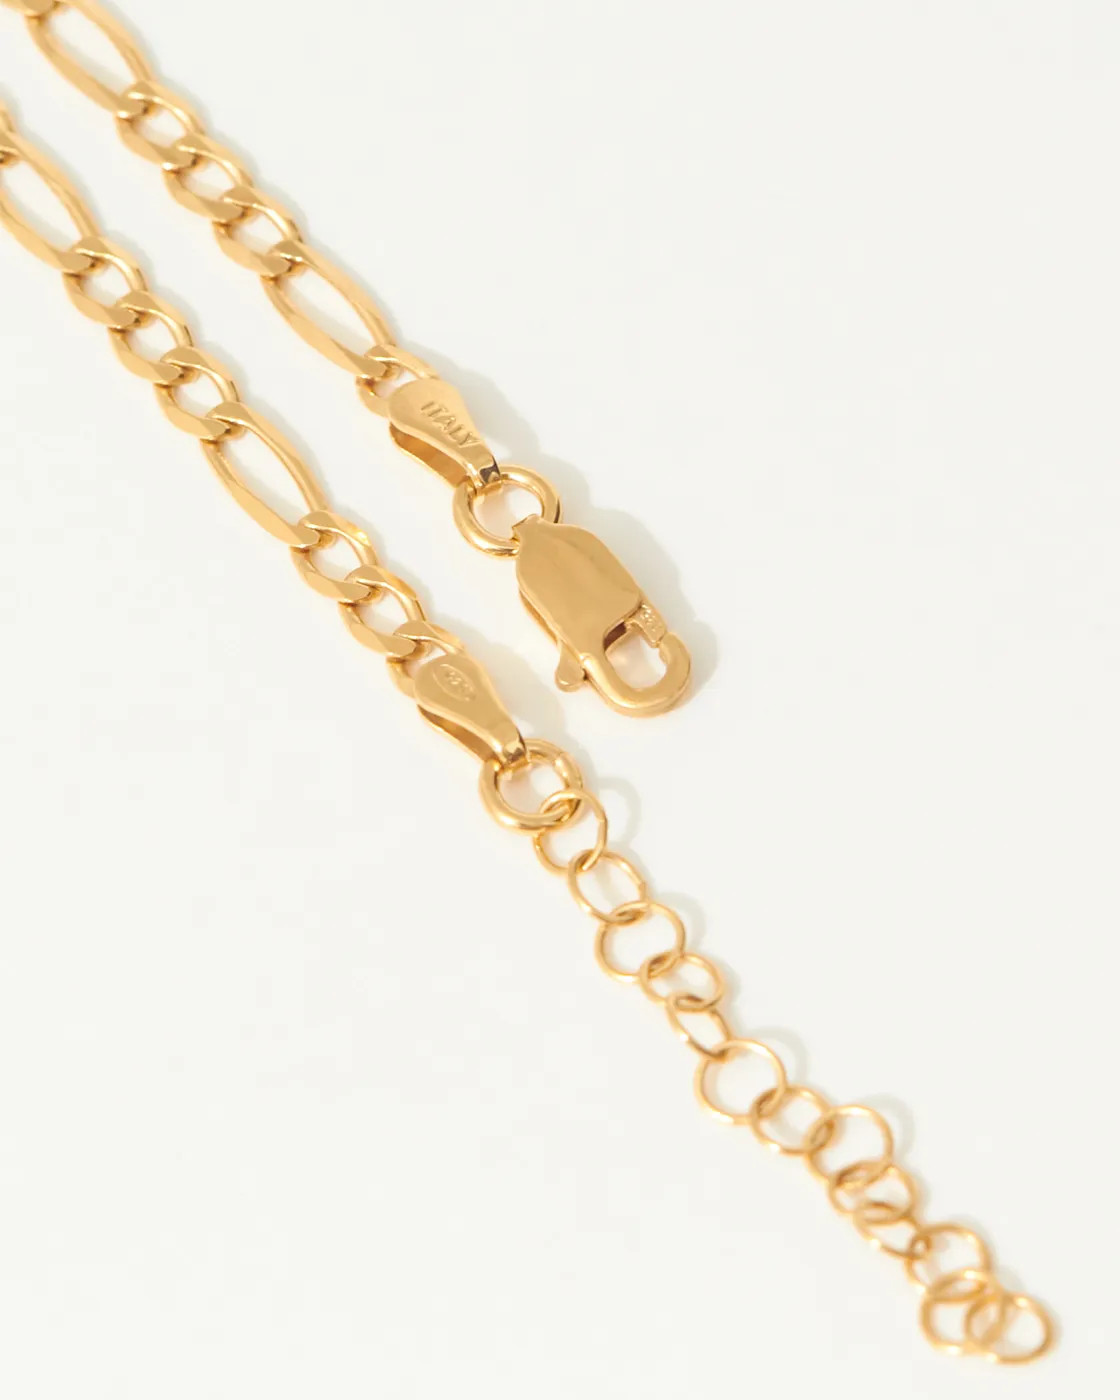 Circe’s Lion Round Large Gold-Plated Silver Anchor Chain